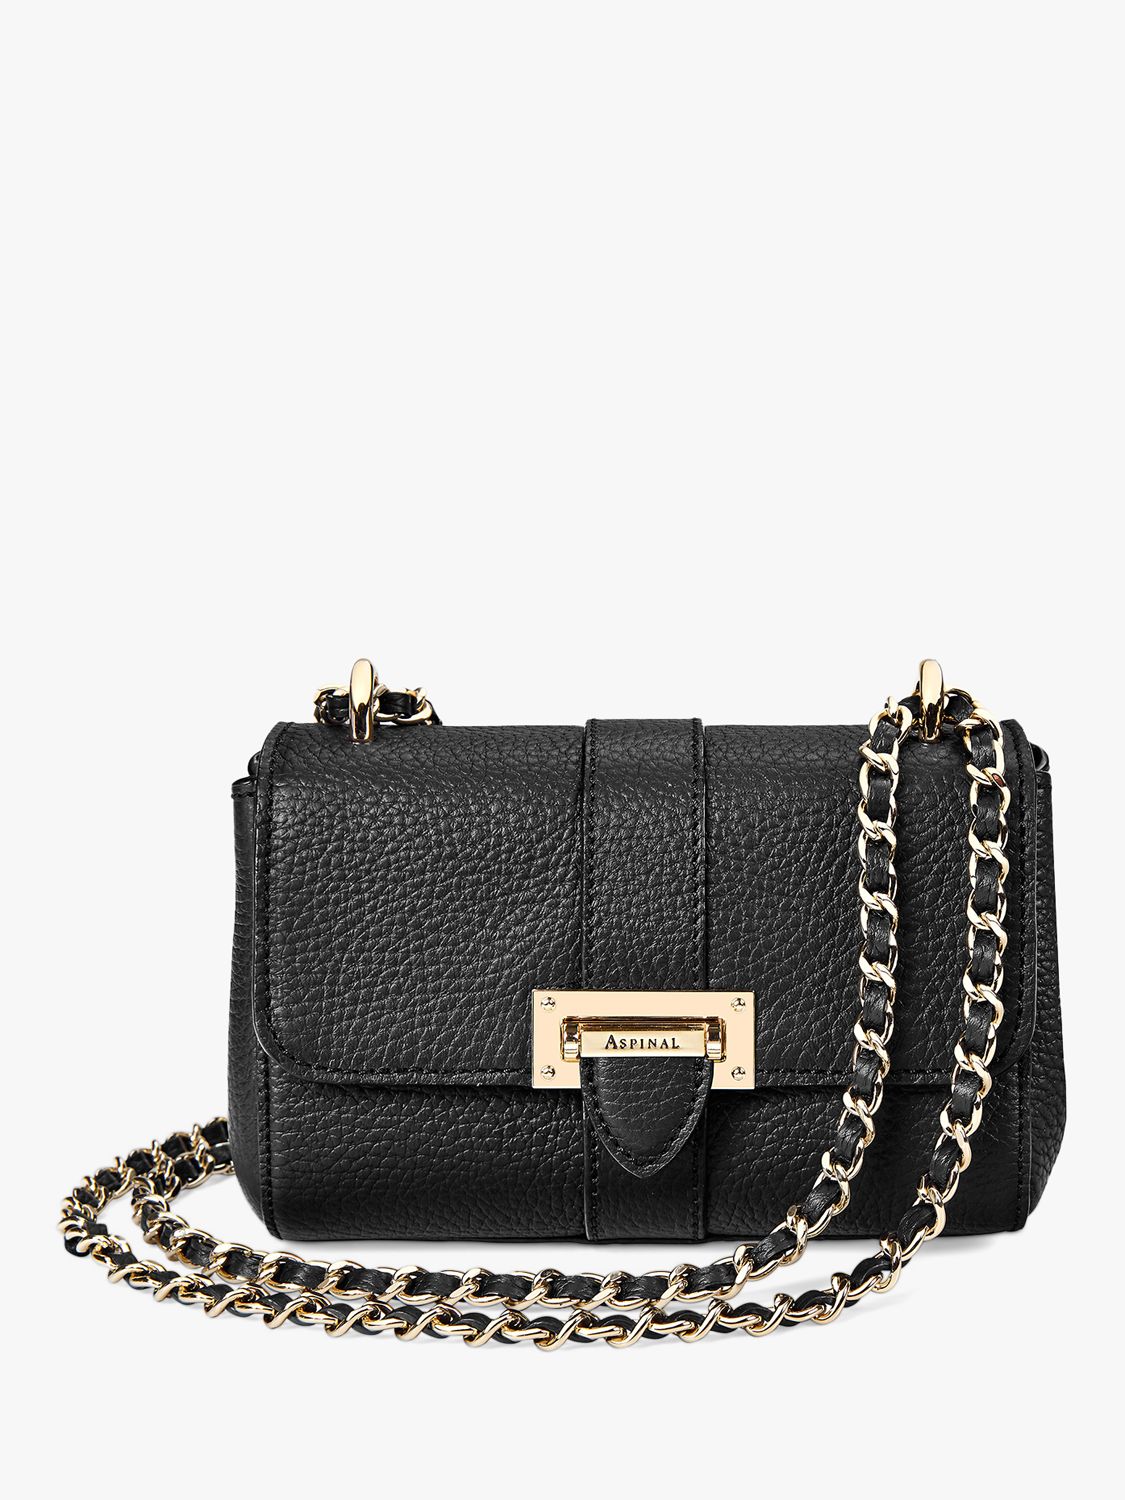 Aspinal of London Lottie Micro Pebble Leather Shoulder Bag, Black at ...